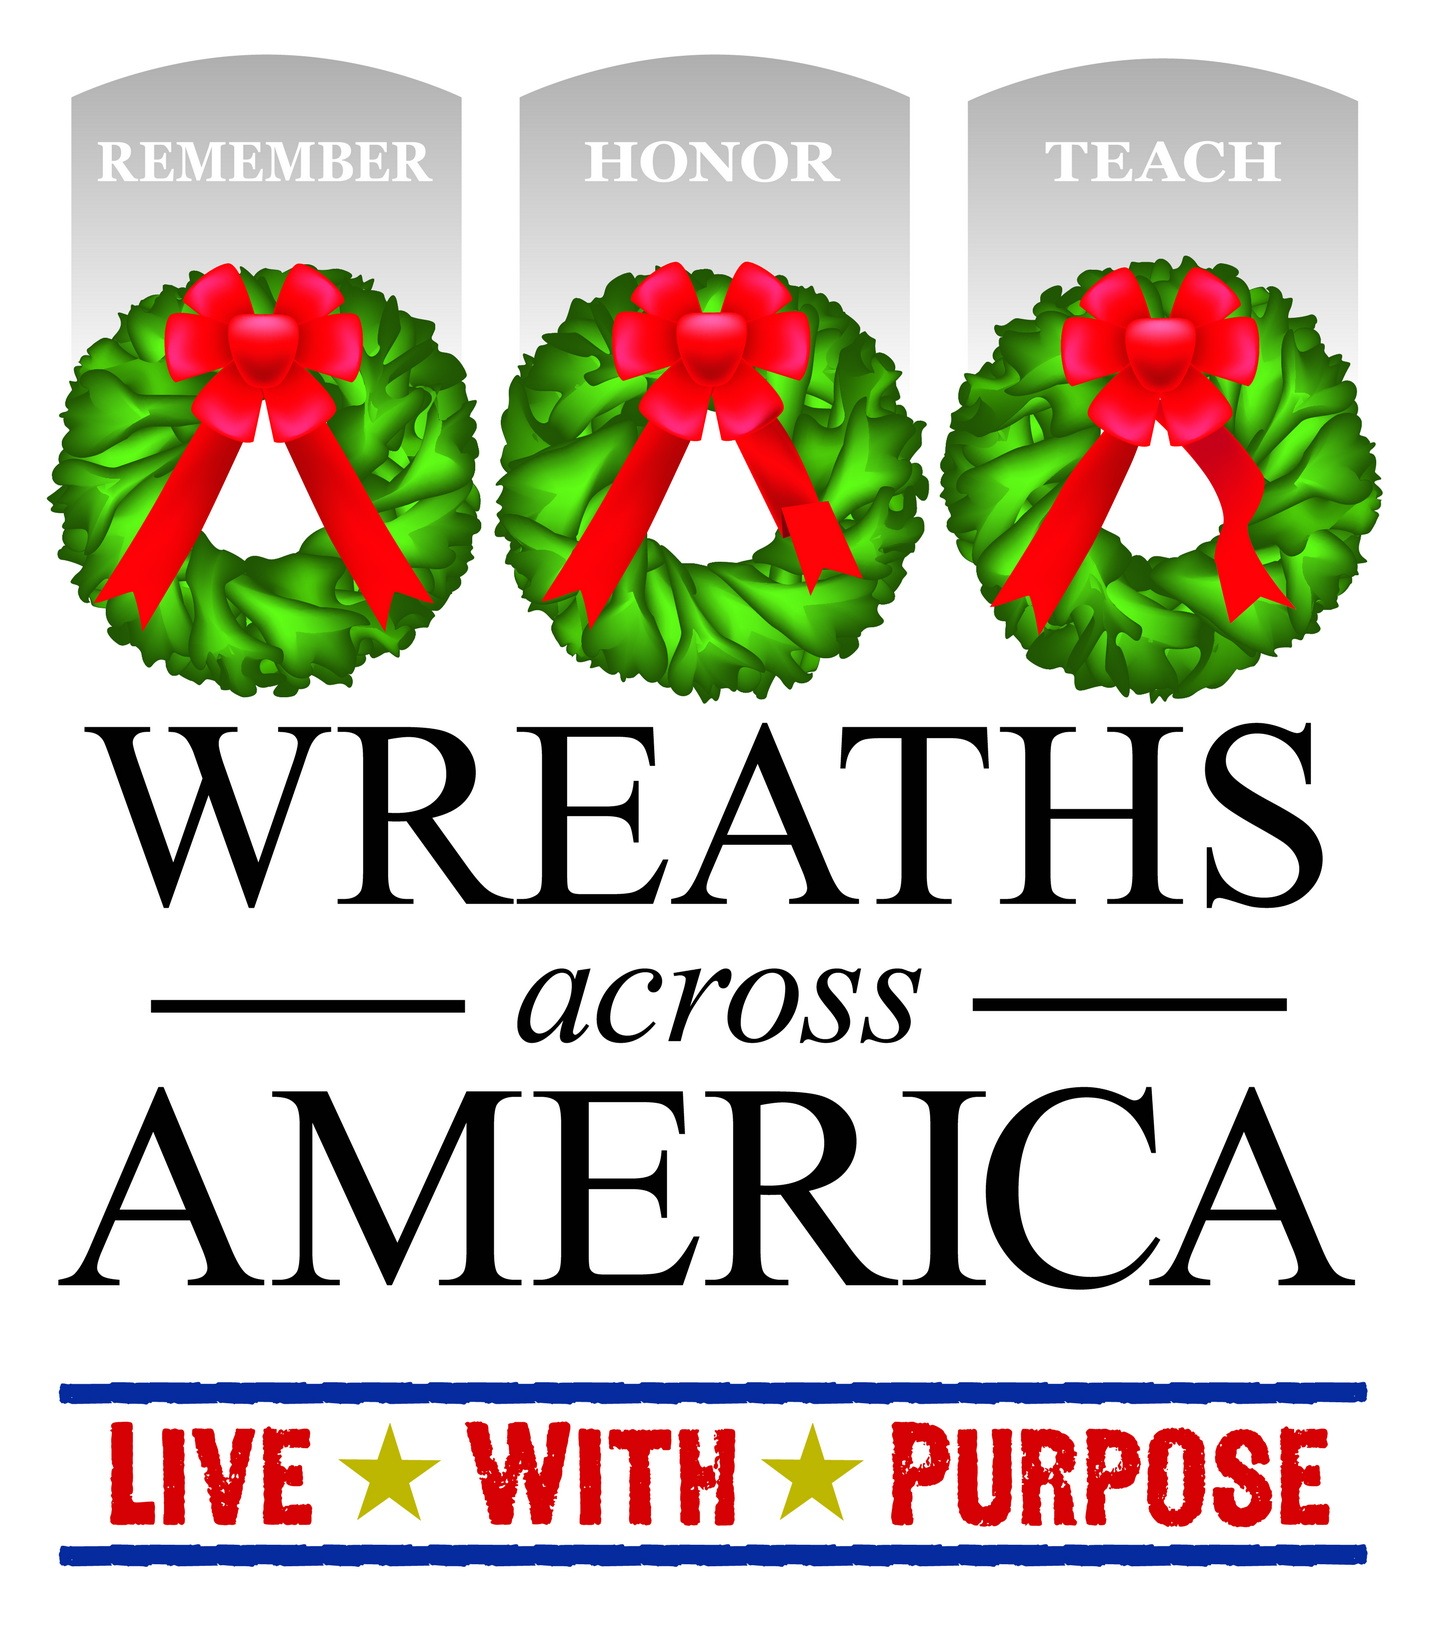 Learn more at Wreaths Across America